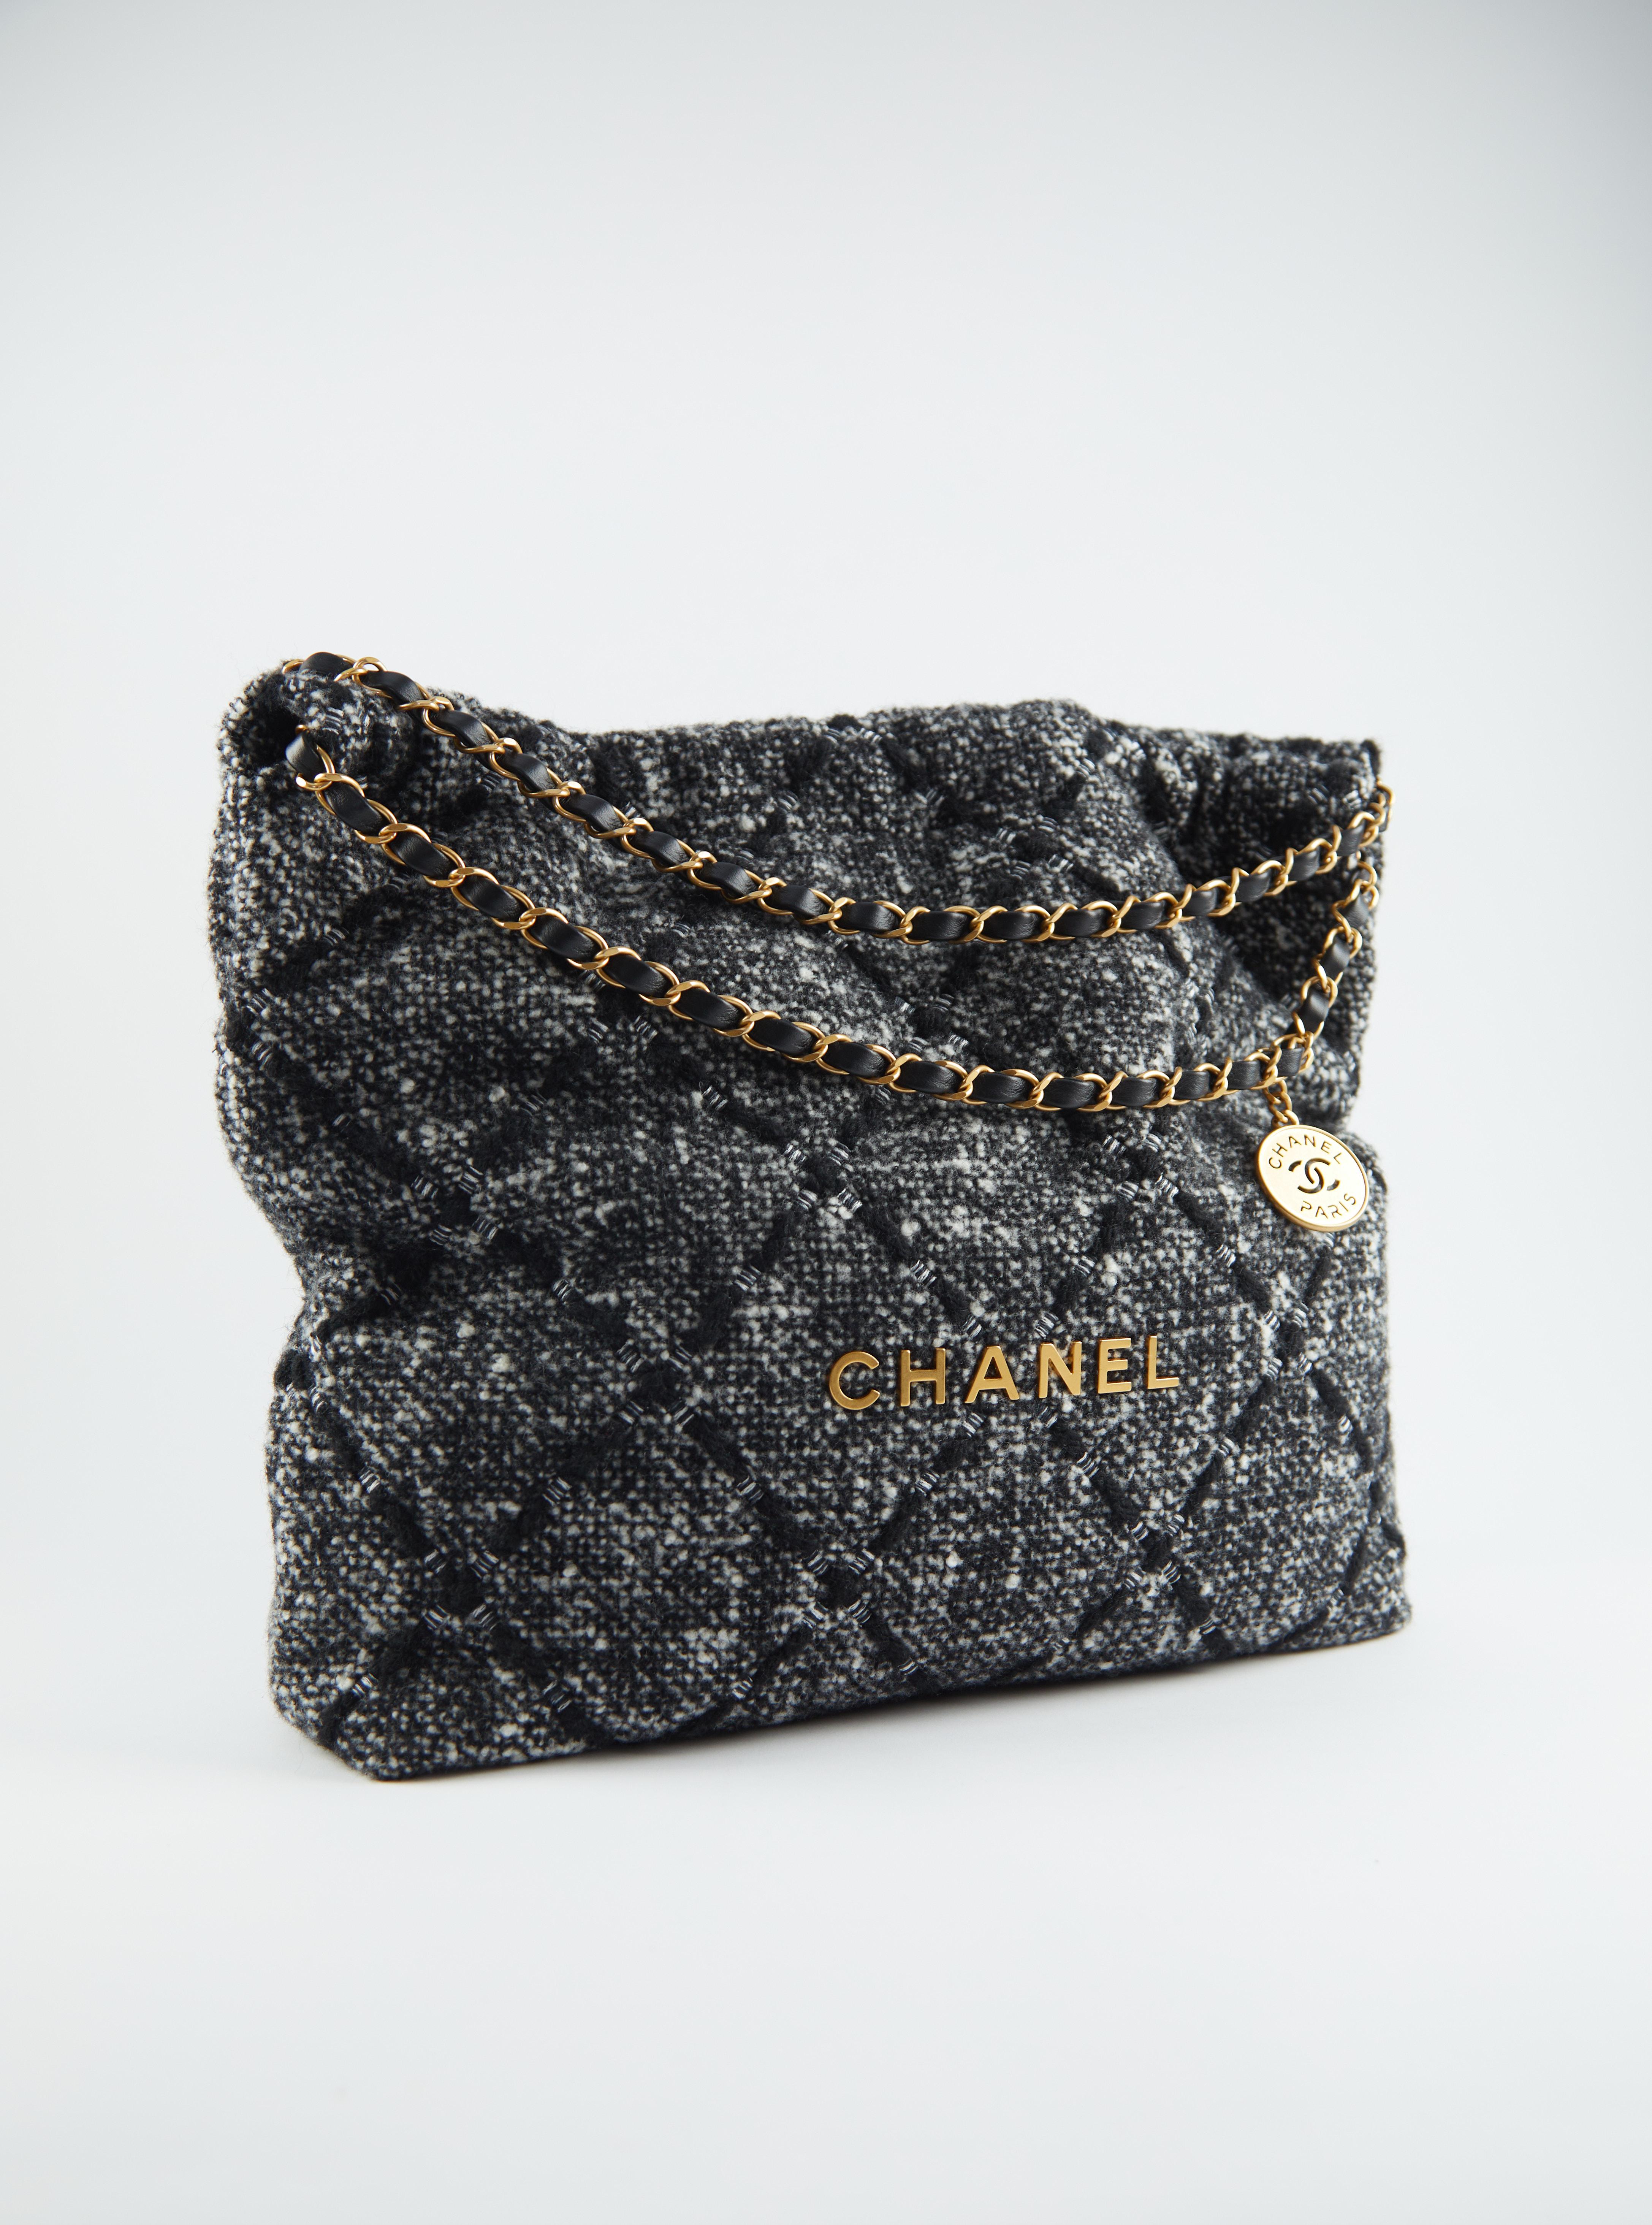 Chanel 22 Bag in Black & Ecru

Tweed Patchwork with Gold-Tone Hardware

Accompanied by: Chanel Box, Dustbag & Authenticity Chip

Dimensions: 38 × 42 × 8 cm

